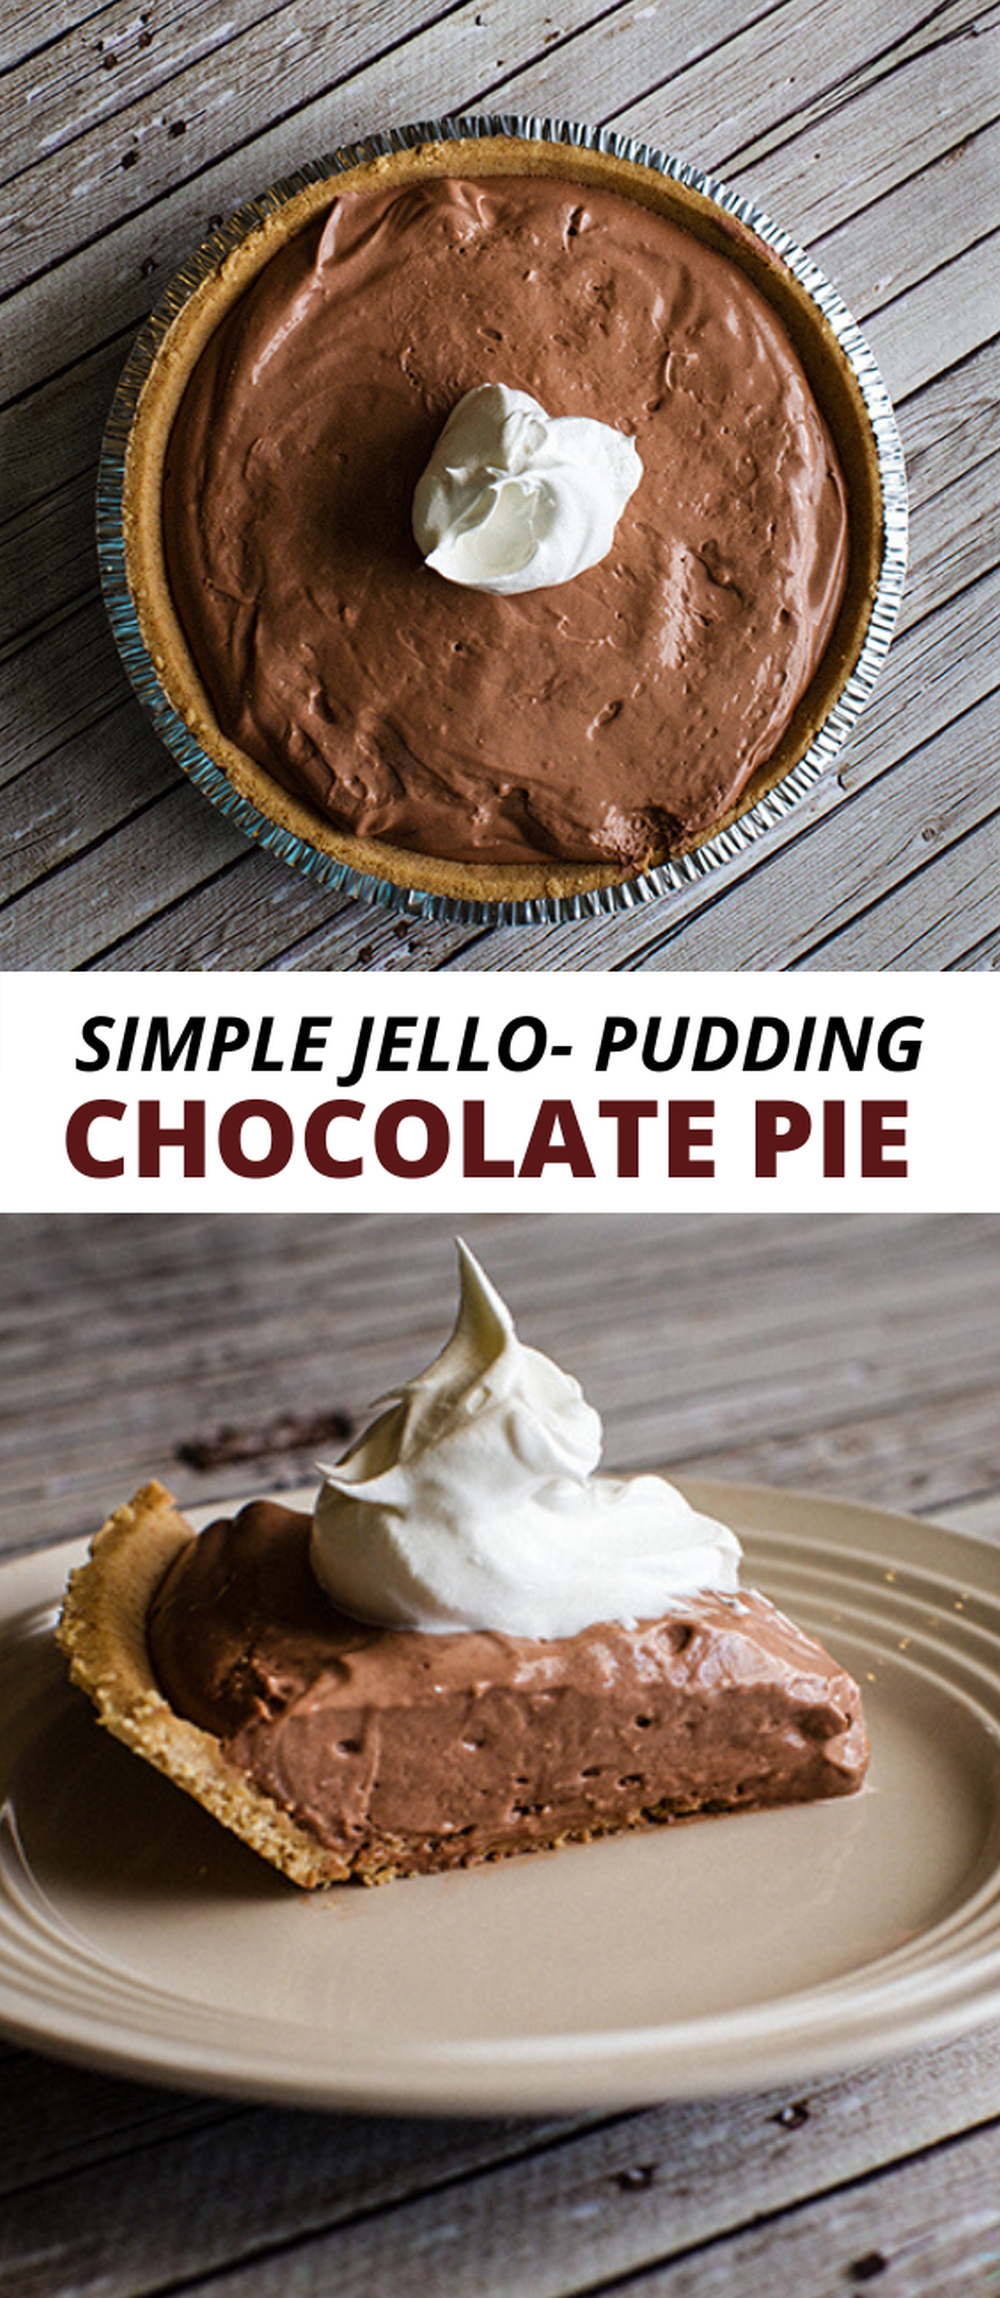 No bake chocolate pie with jell o pudding chocolate thanksgiving desserts